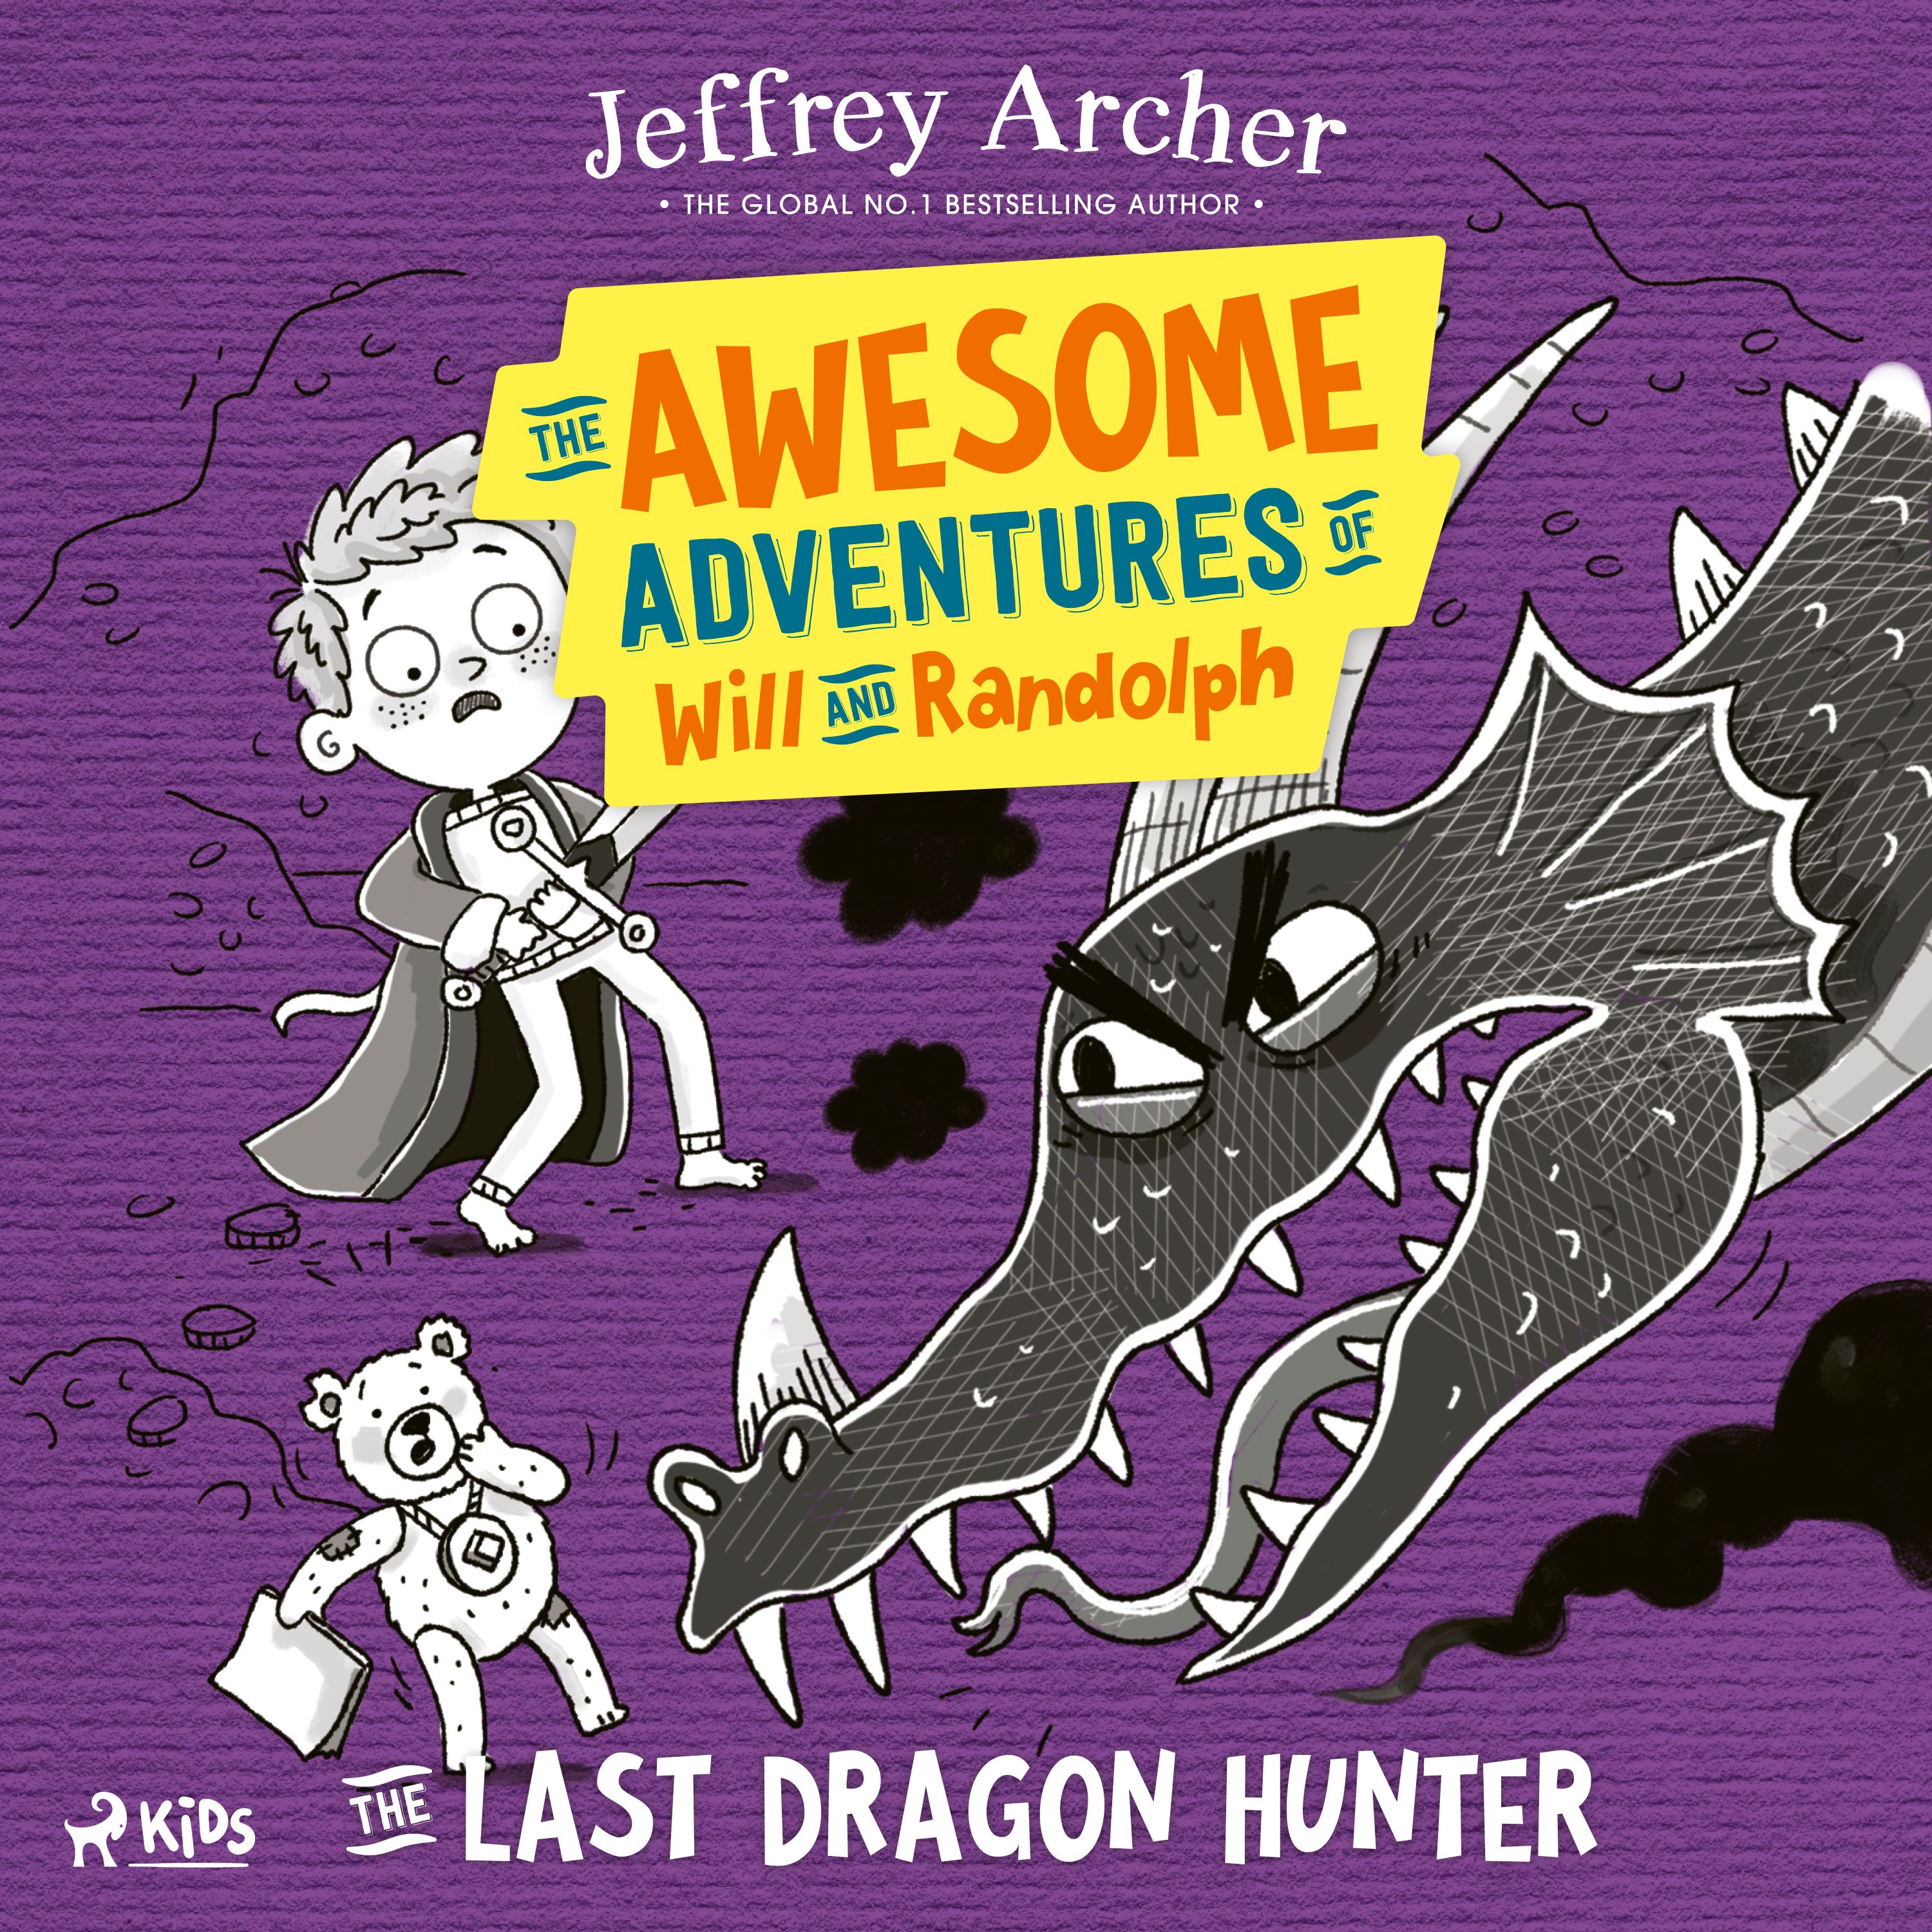 The Awesome Adventures of Will and Randolph: The Last Dragon Hunter, lydbog af Jeffrey Archer